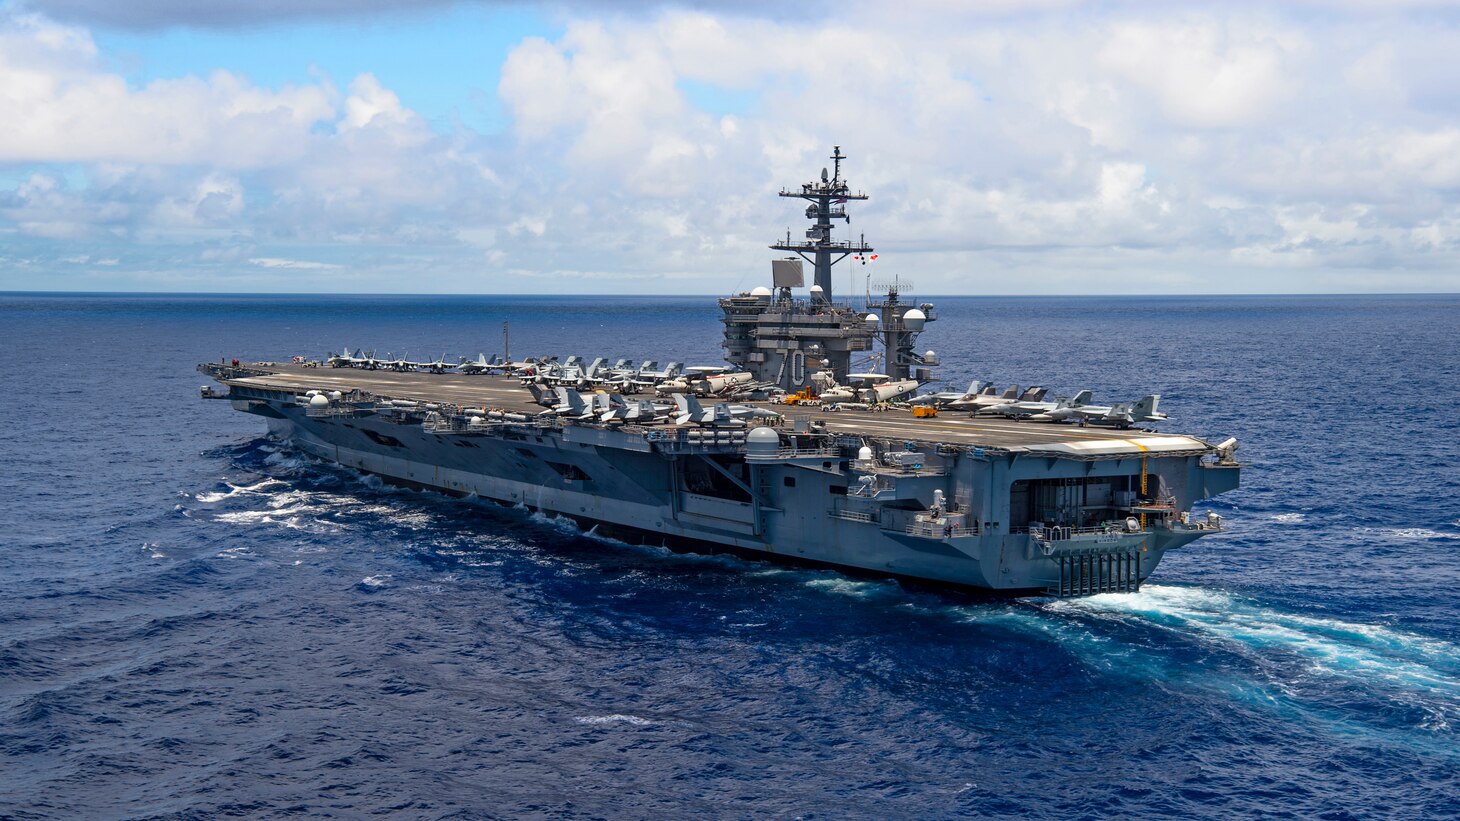 210622-N-HS181-1526 PACIFIC OCEAN (June 22, 2021) Nimitz-class aircraft carrier USS Carl Vinson (CVN 70) transits the Pacific Ocean, June 22, 2021. Vinson is currently underway conducting routine maritime operations in U.S. 3rd Fleet. (U.S. Navy photo by Mass Communication Specialist 3rd Class Haydn N. Smith)